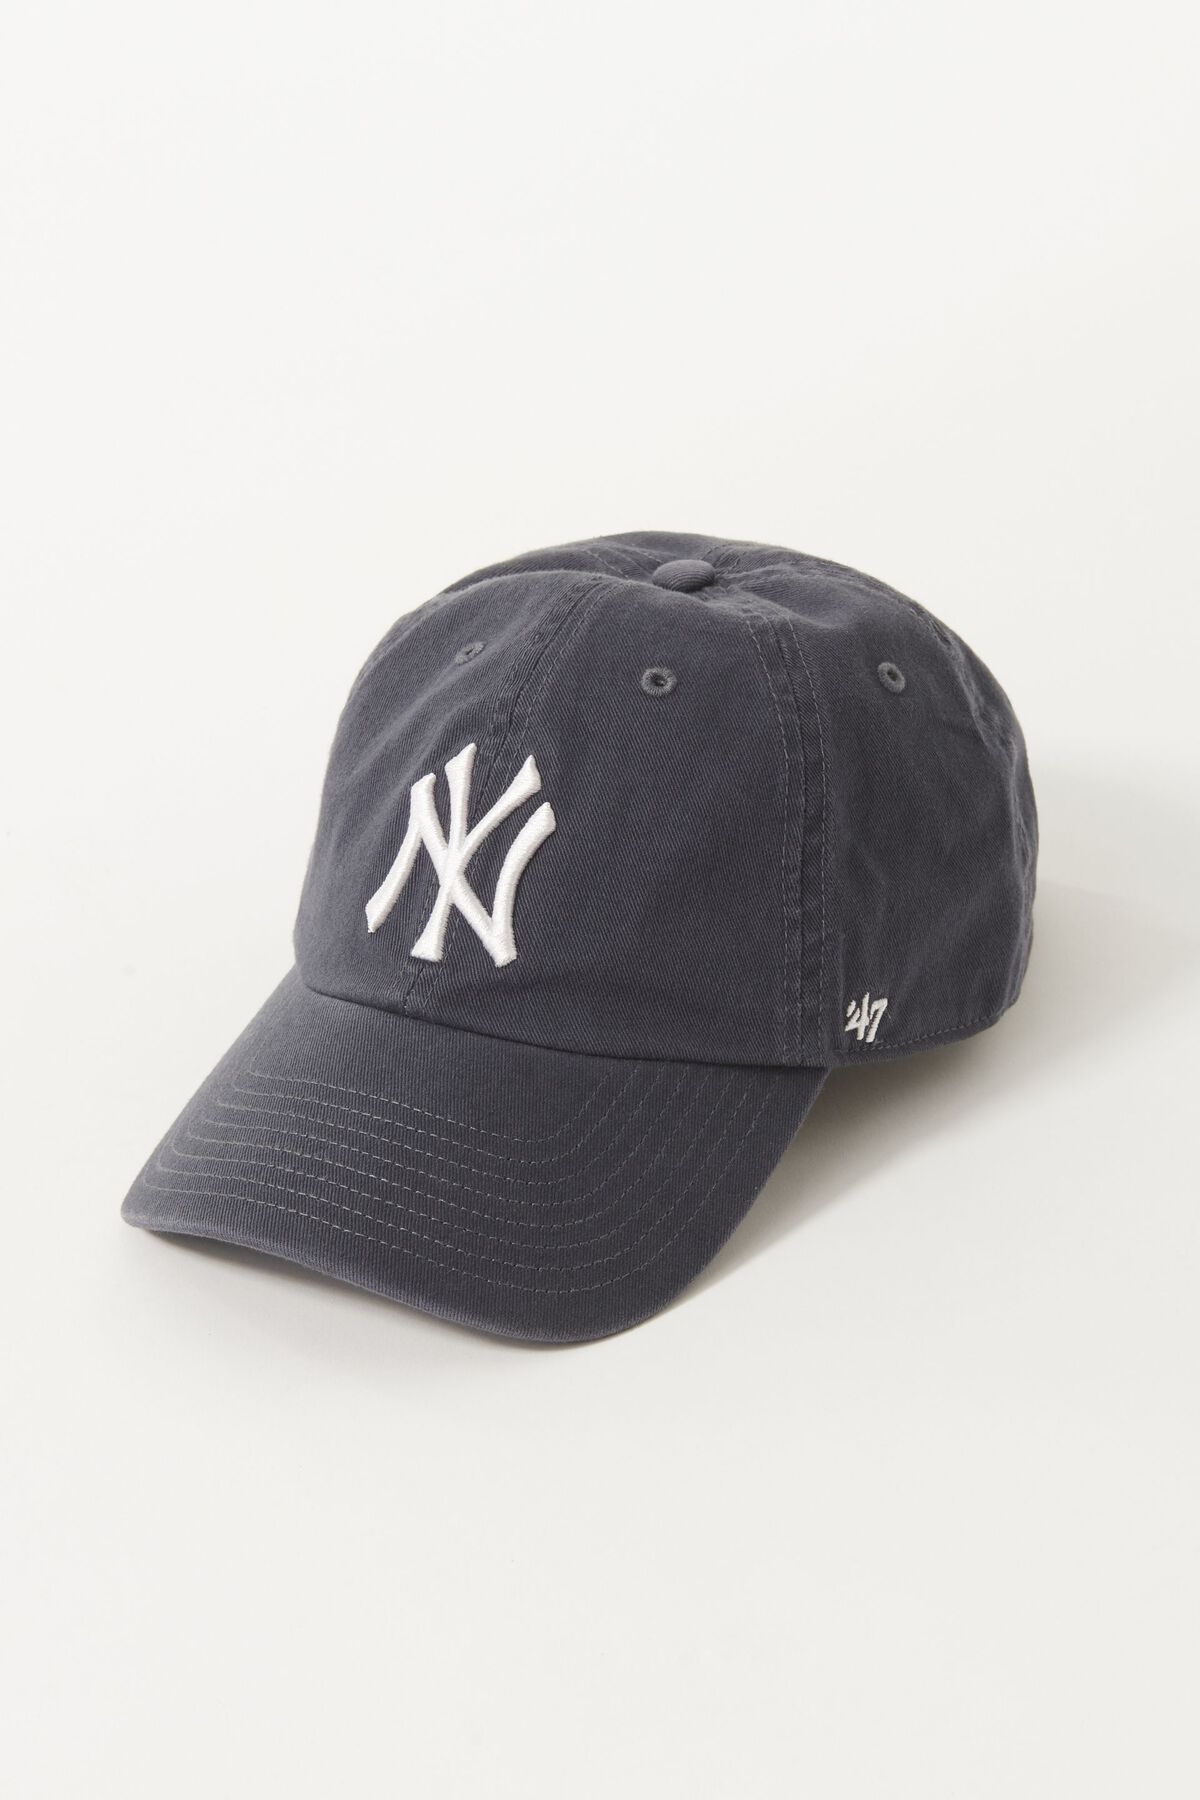 Garage 47 BRAND Clean Up Cap - NY. 2